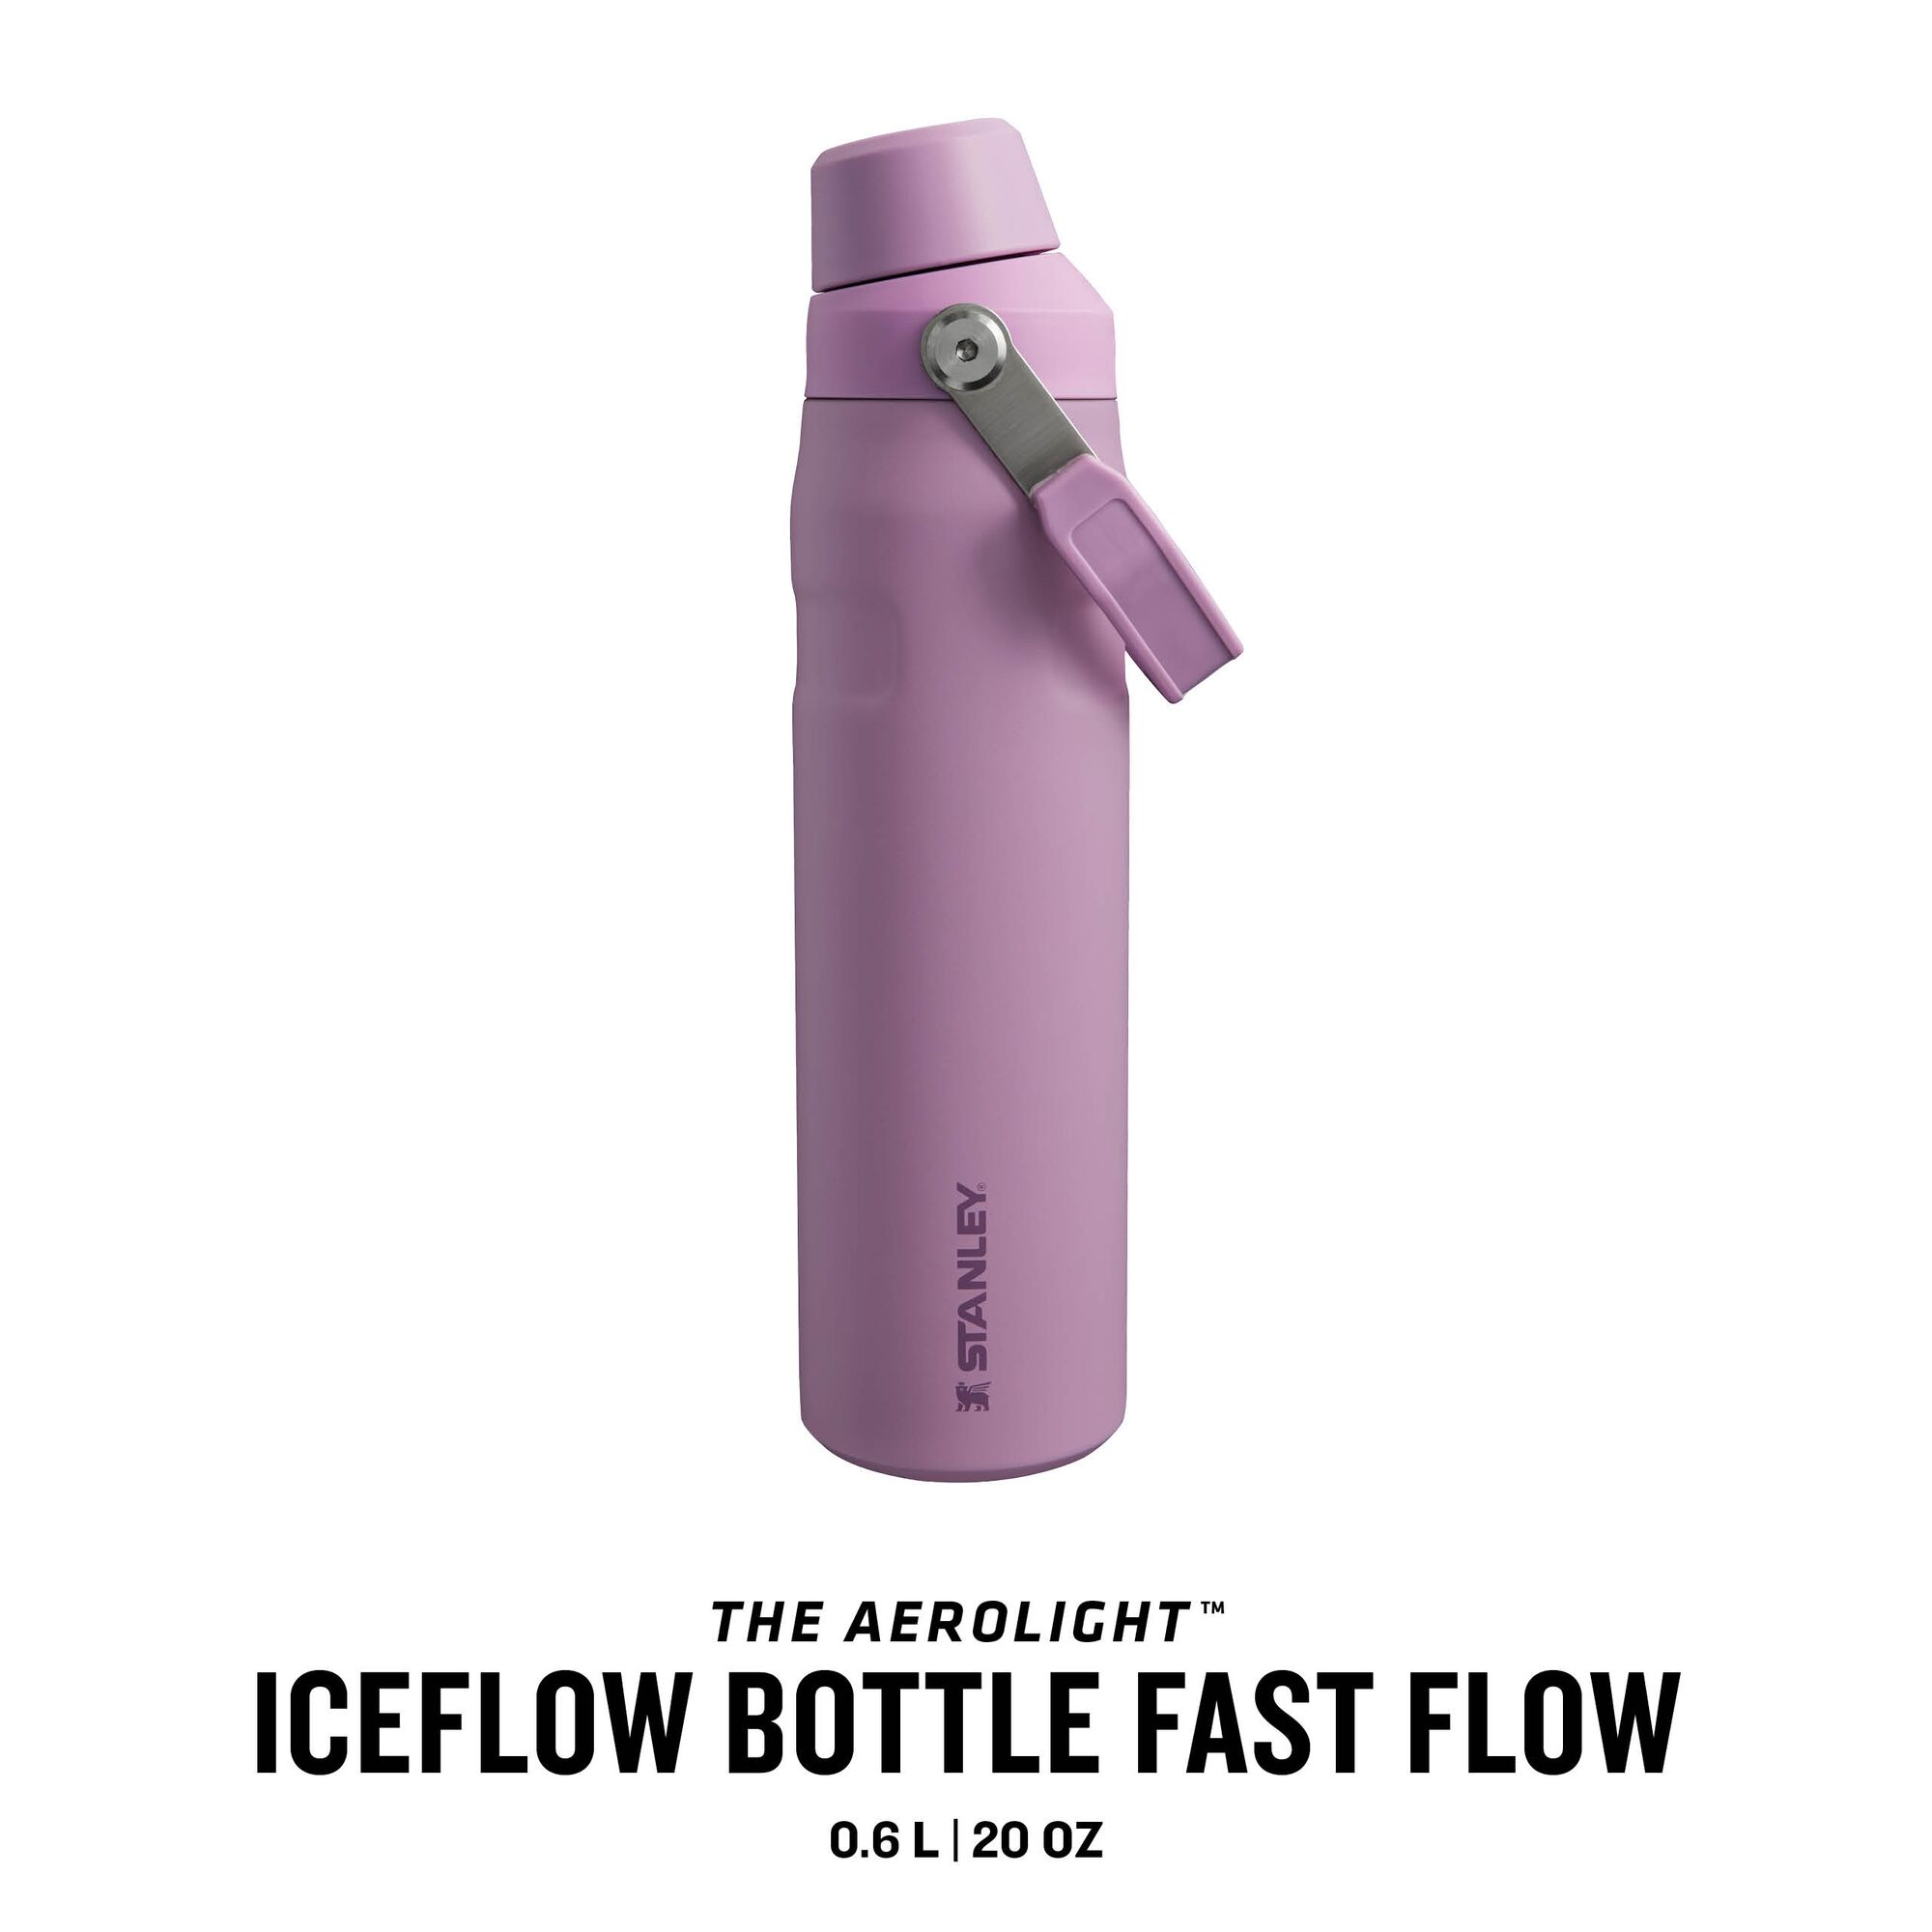 Stanley Isolierflasche The Aerolight Iceflow Bottle Fast Flow 0,6l Lilac